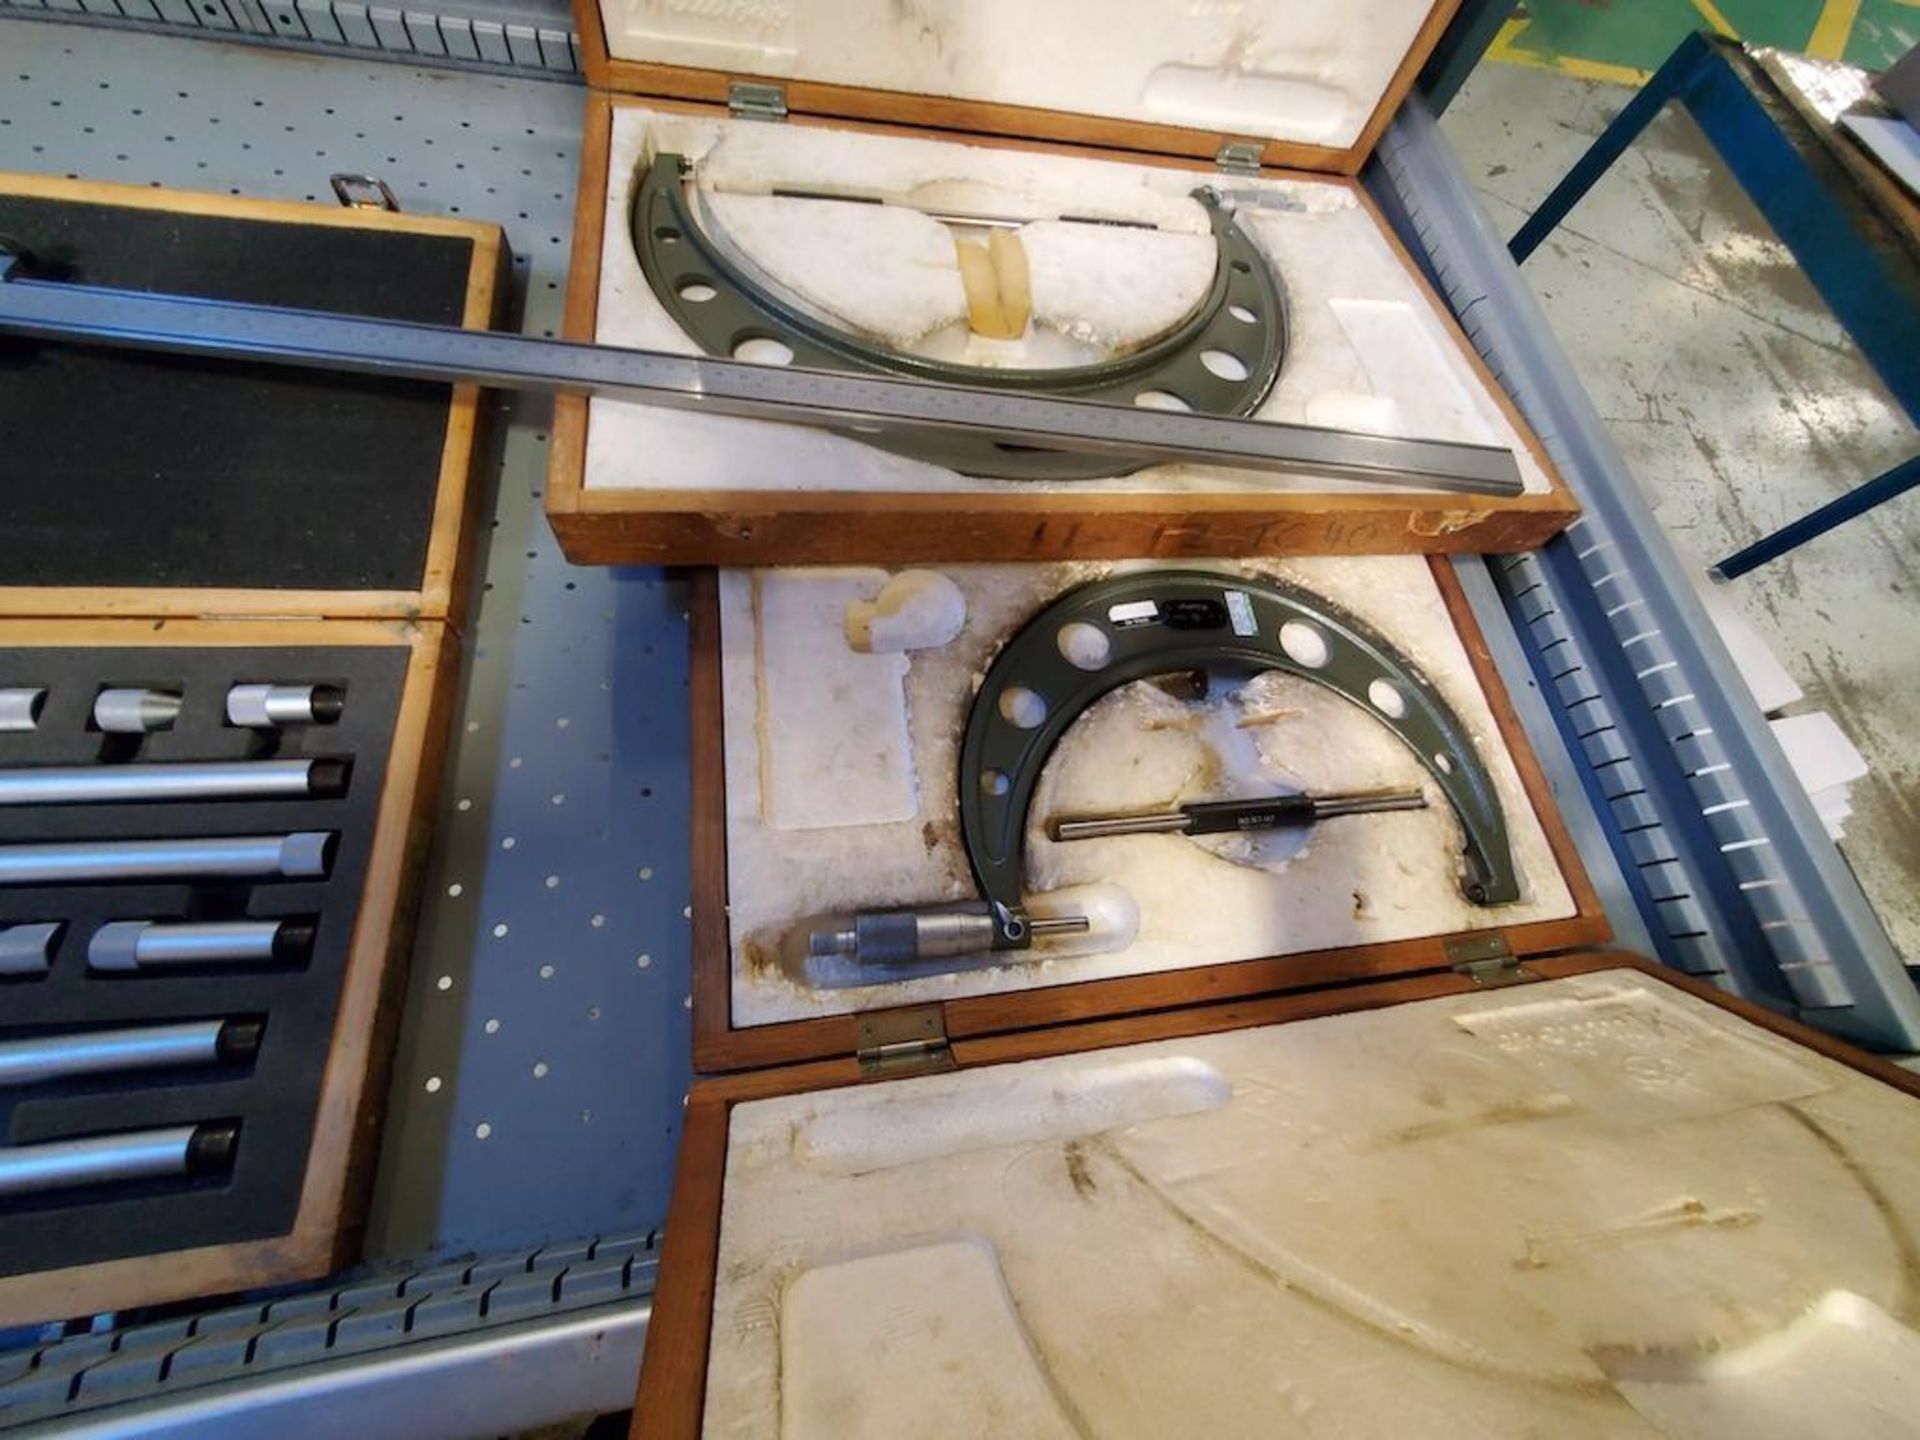 LOT PRECISION INSPECTION: 24INCH VERNIER, INSIDE MICROMETER, BORE GAUGE, MITUTOYO 3 CALIPERS UP TO - Image 5 of 5